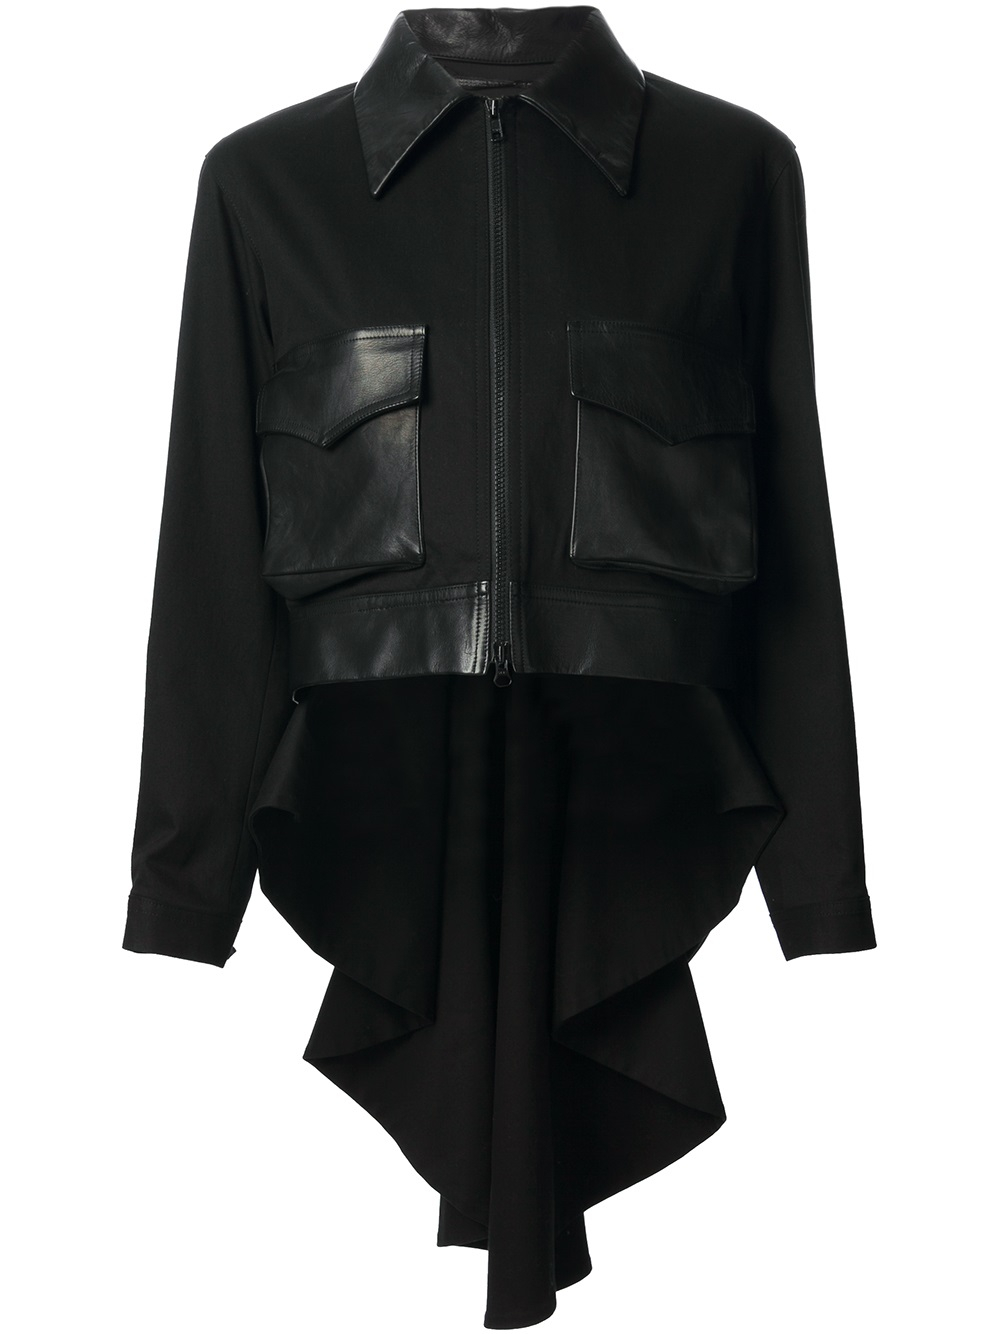 Yohji Yamamoto Structured Jacket with Leather Pockets and Frac in Black ...